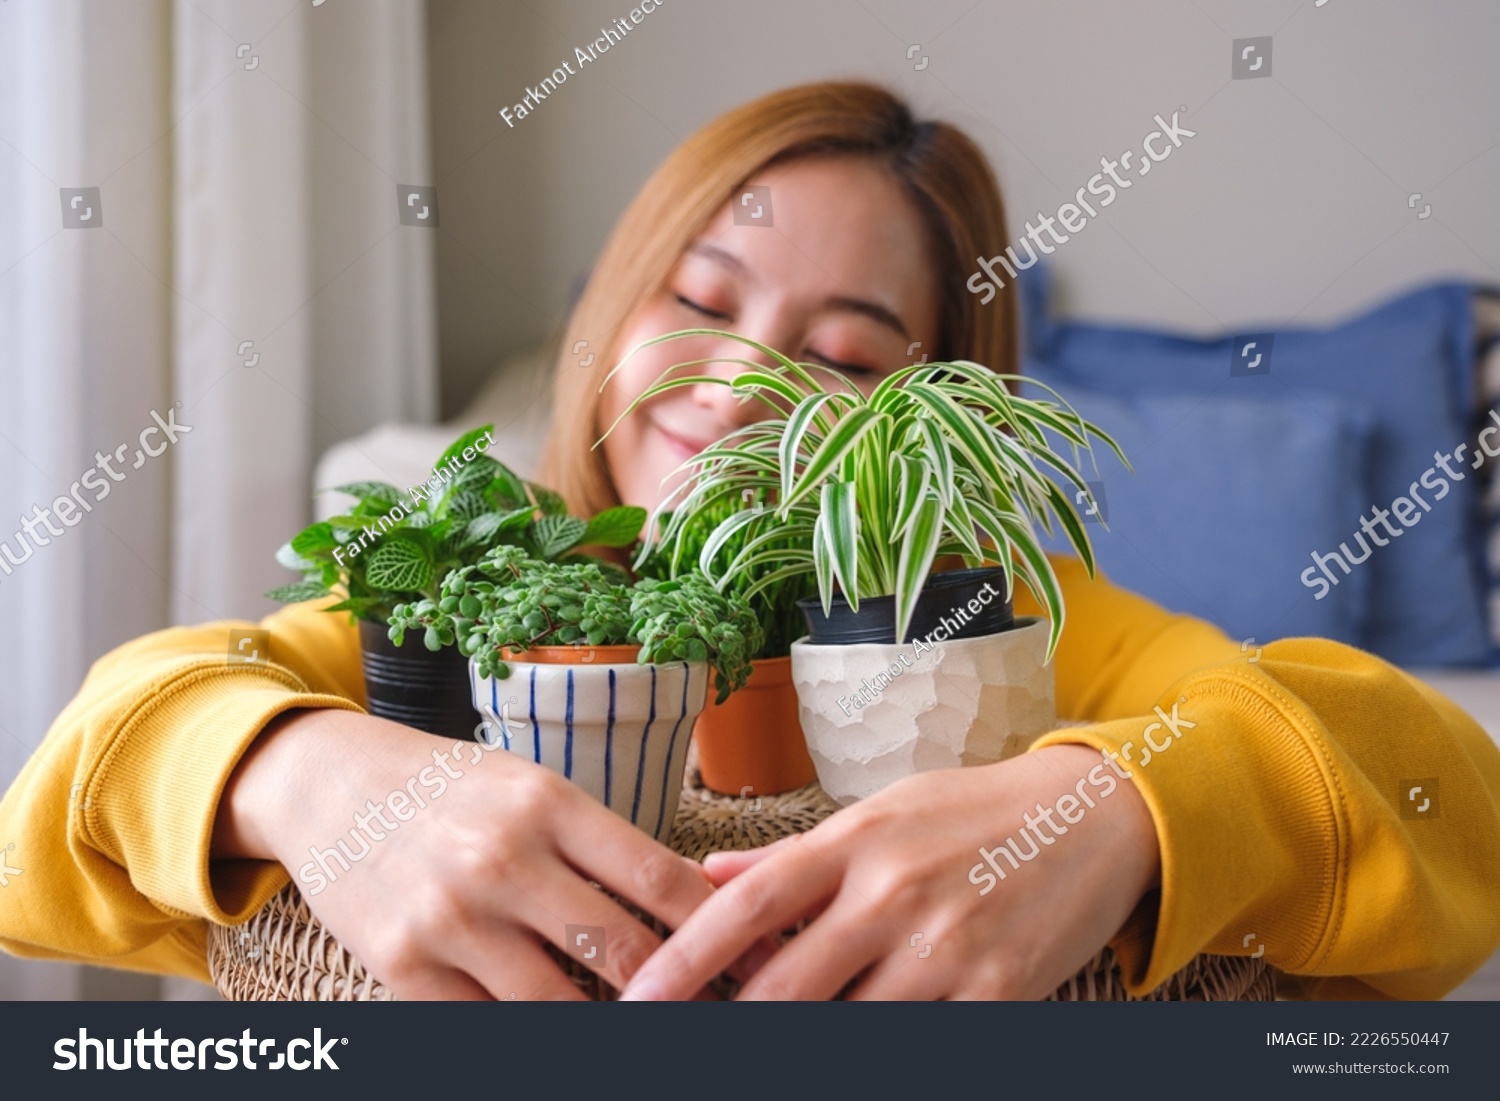 Portrait image of a beautiful young woman holding and hugging houseplants at home #2226550447